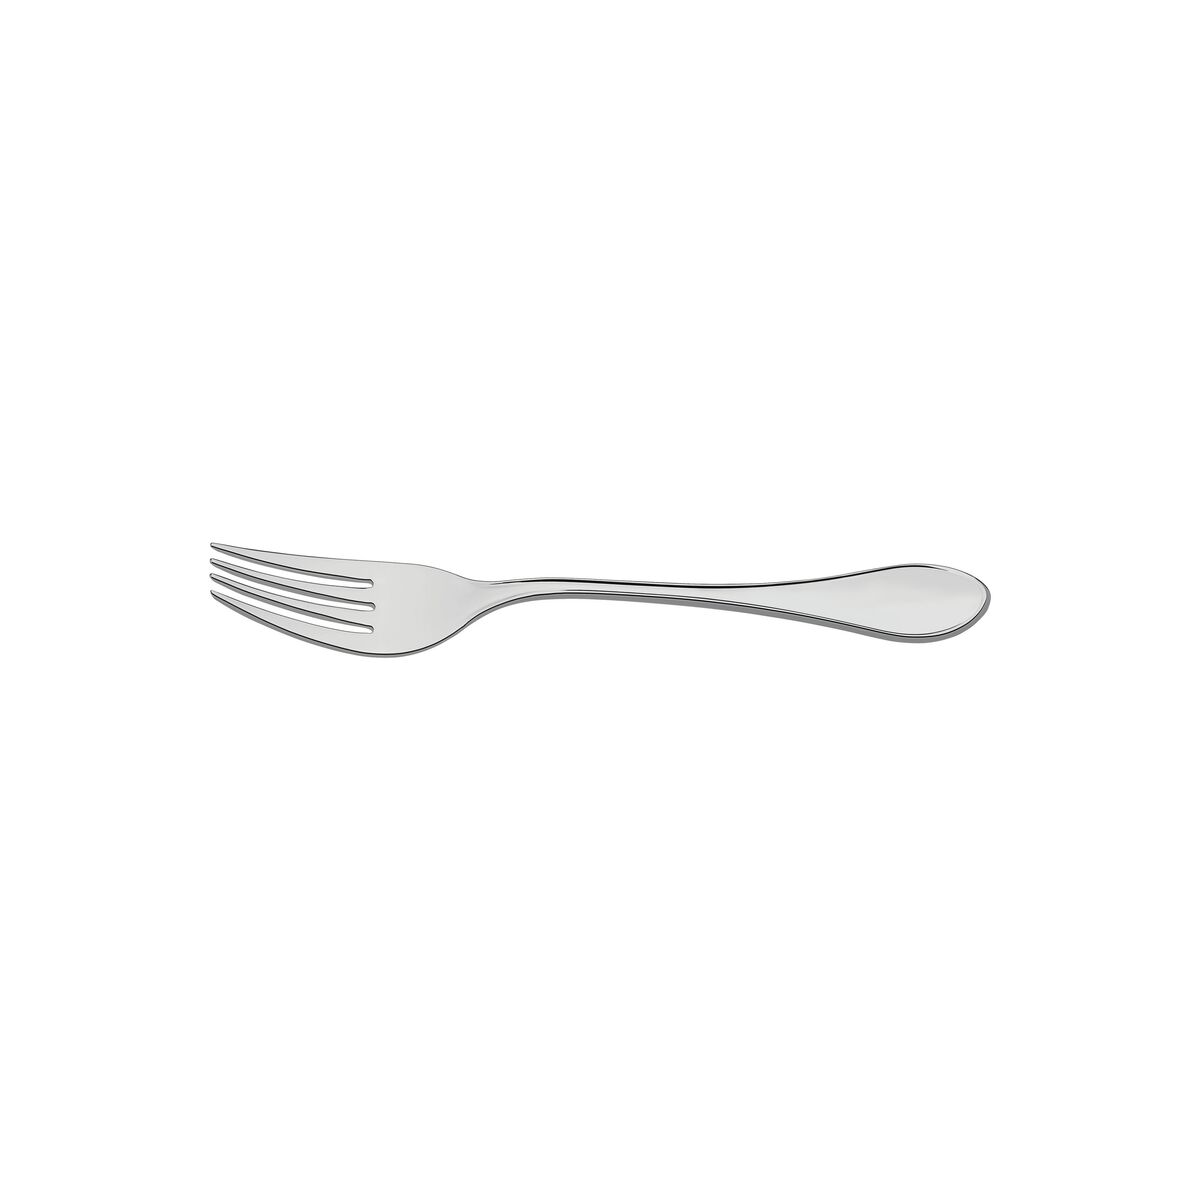 Tramontina Italy stainless steel pastry fork